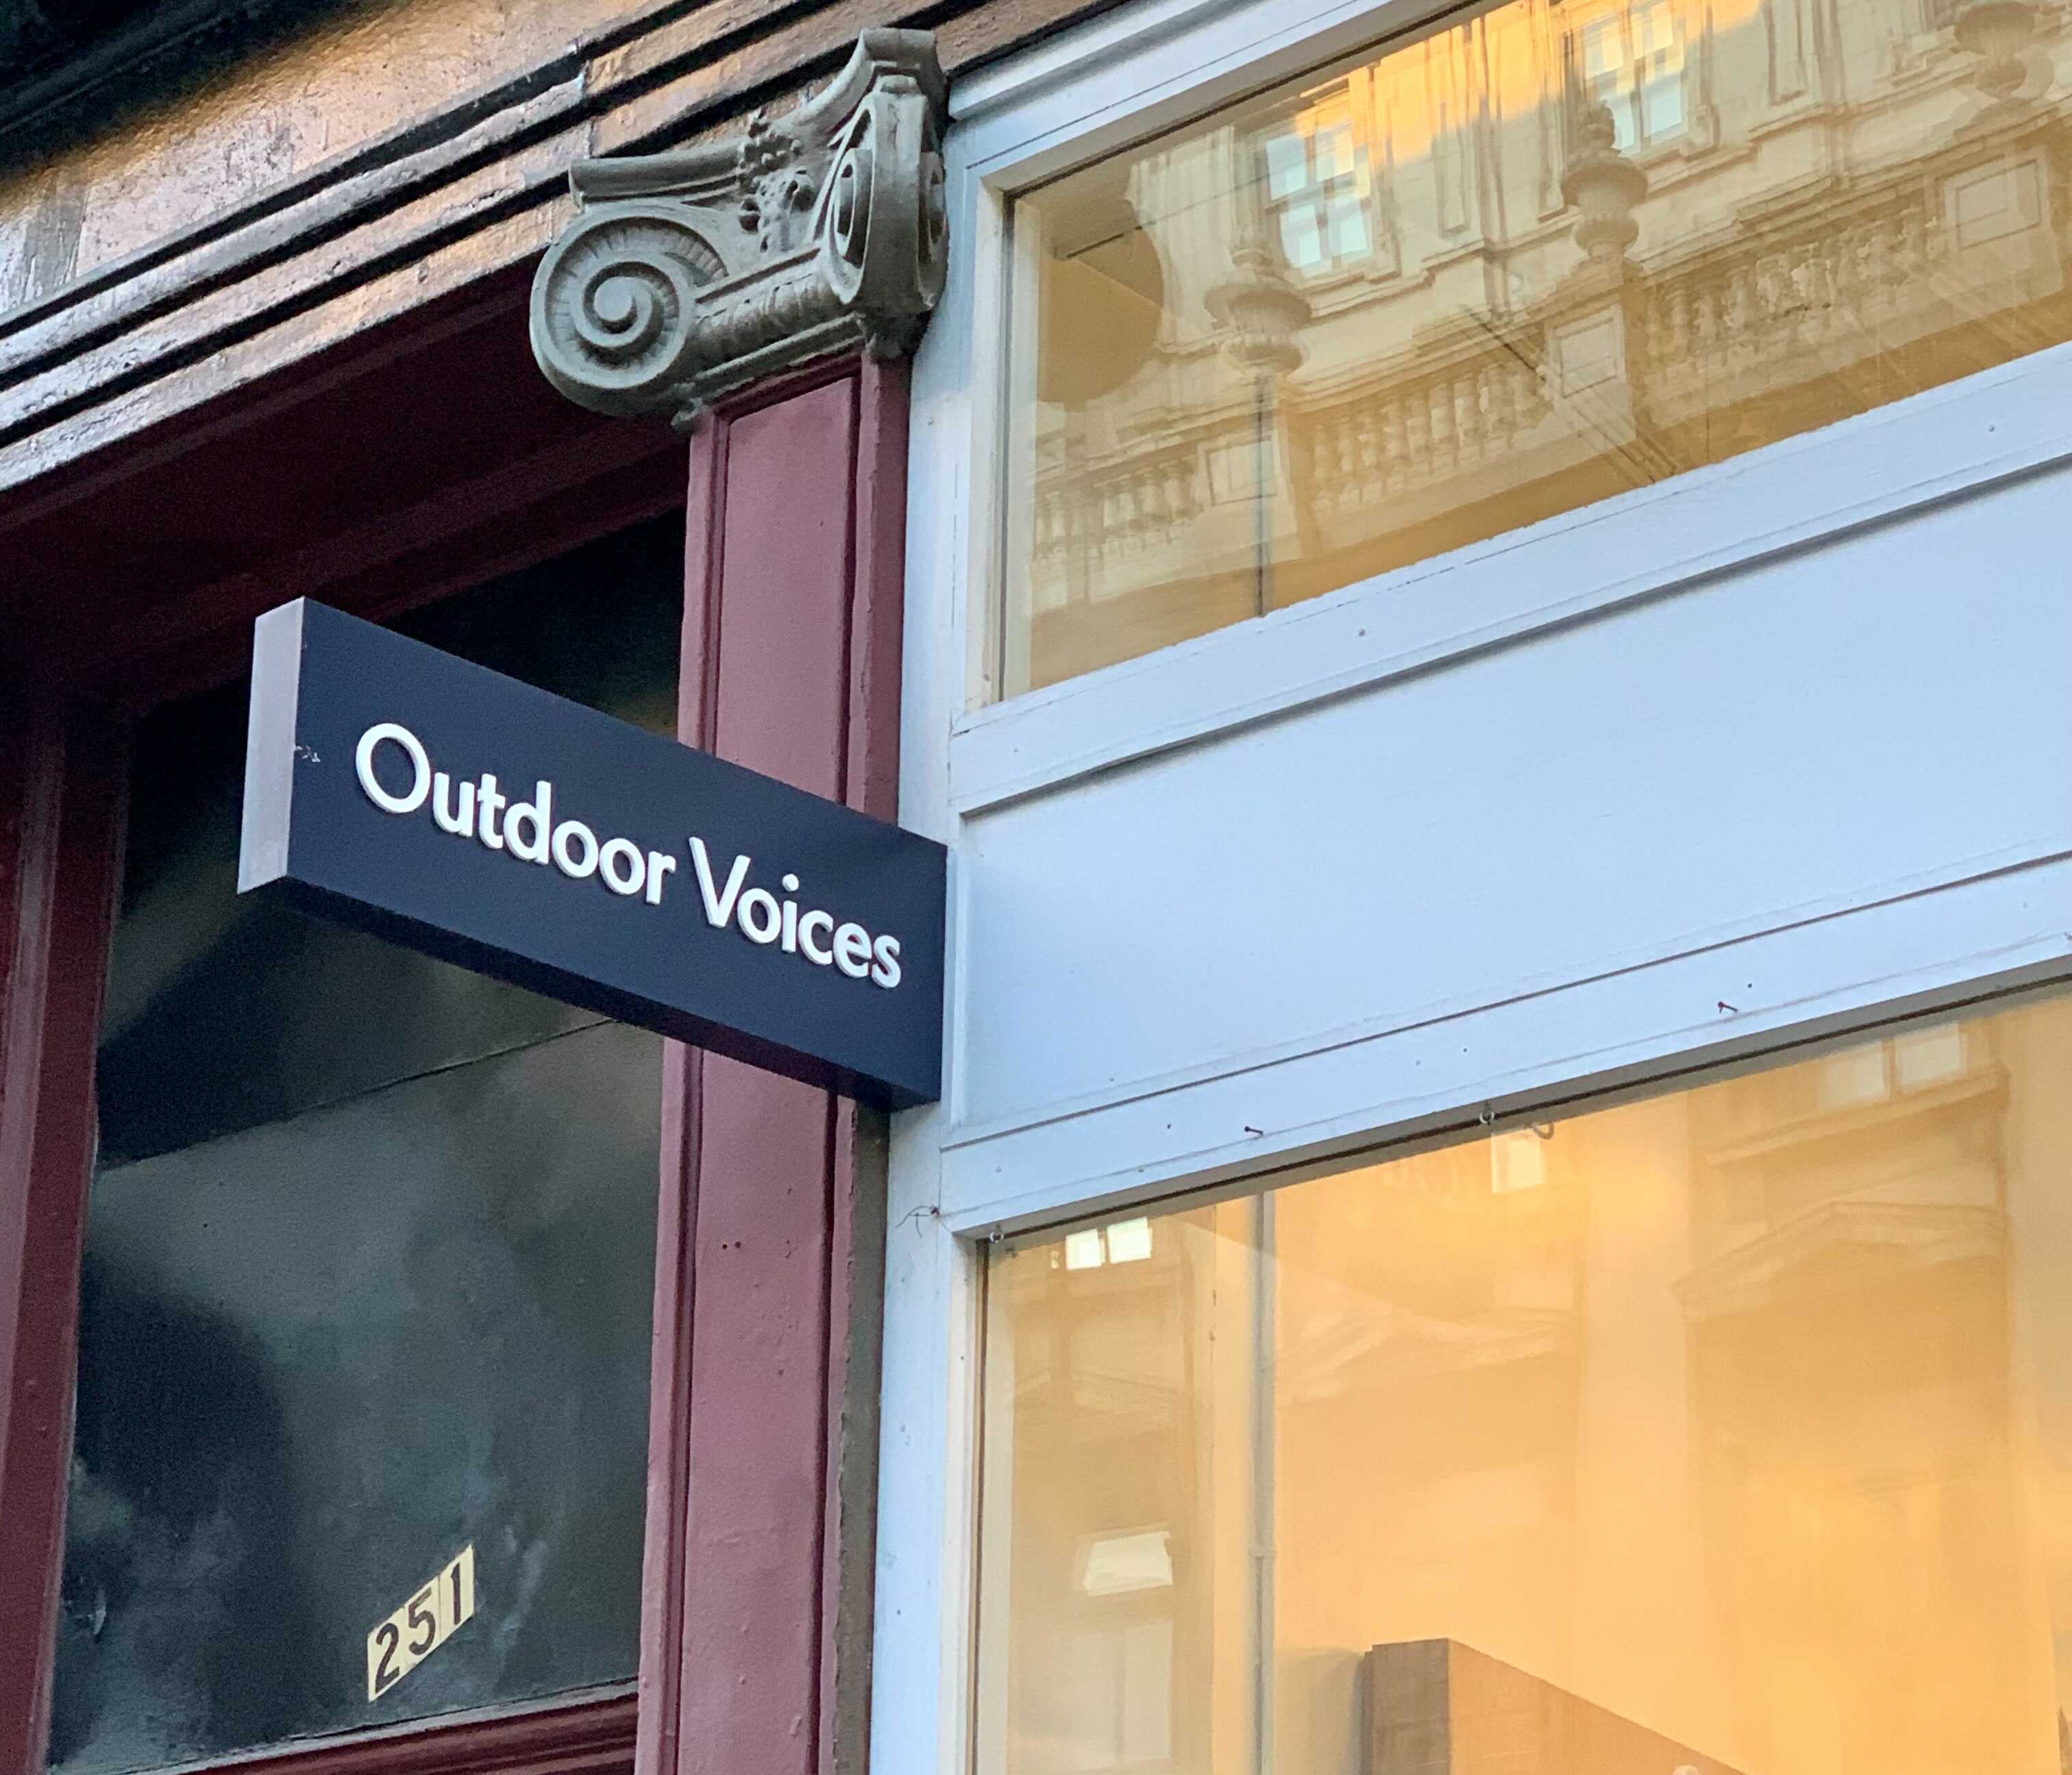 Outdoor Voices closes stores but has items on sale online